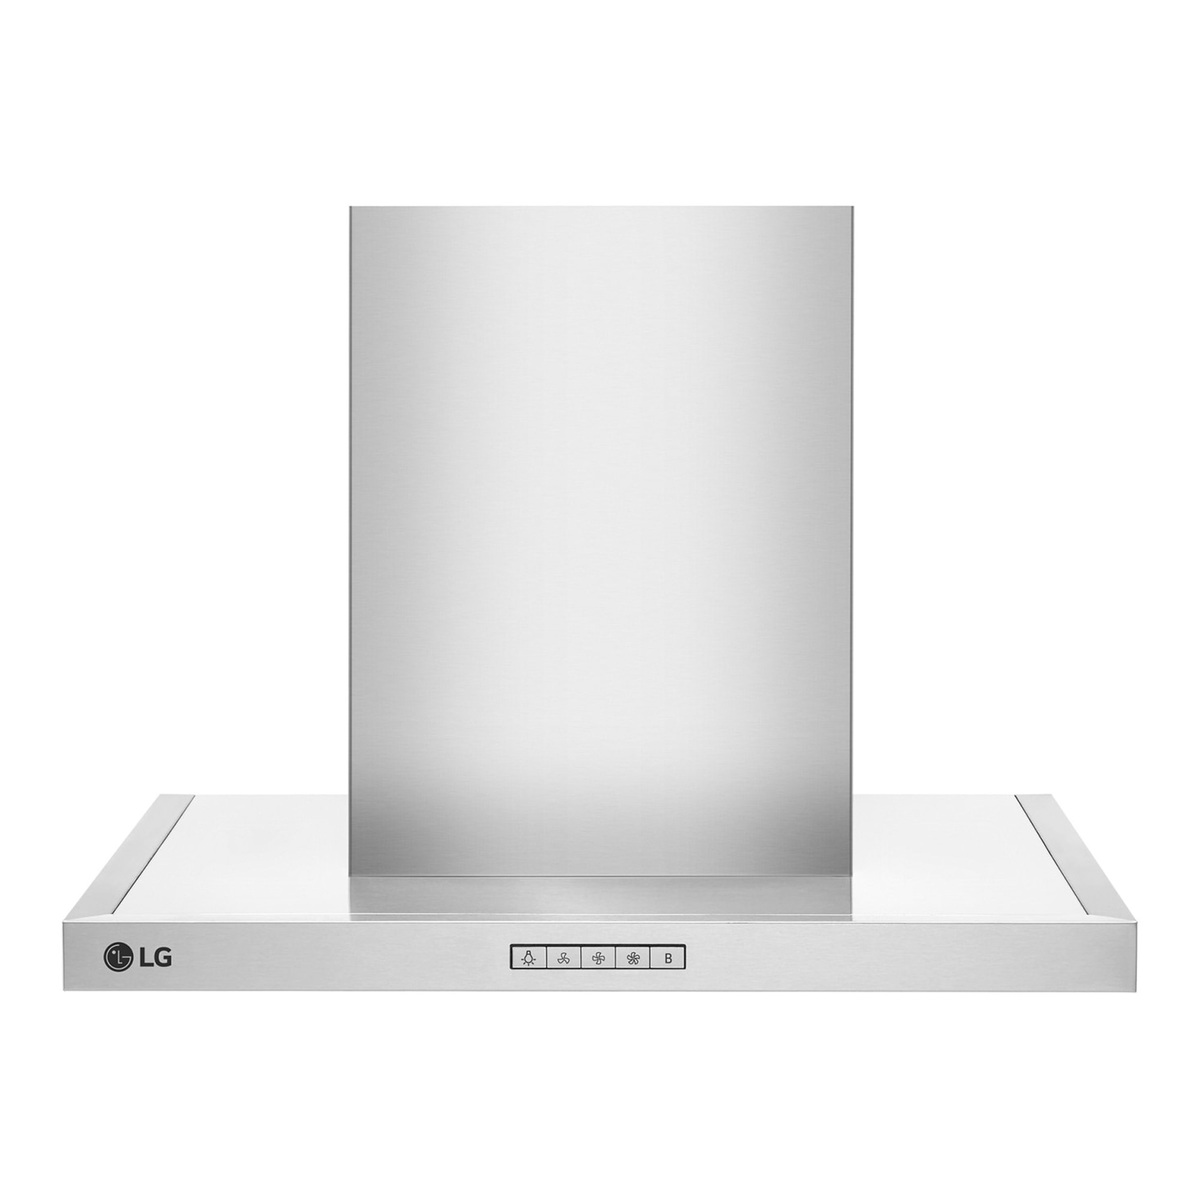 LG T-shaped Kitchen Cooker Hood, 60 cm, Stainless Steel, HCEZ2415S2